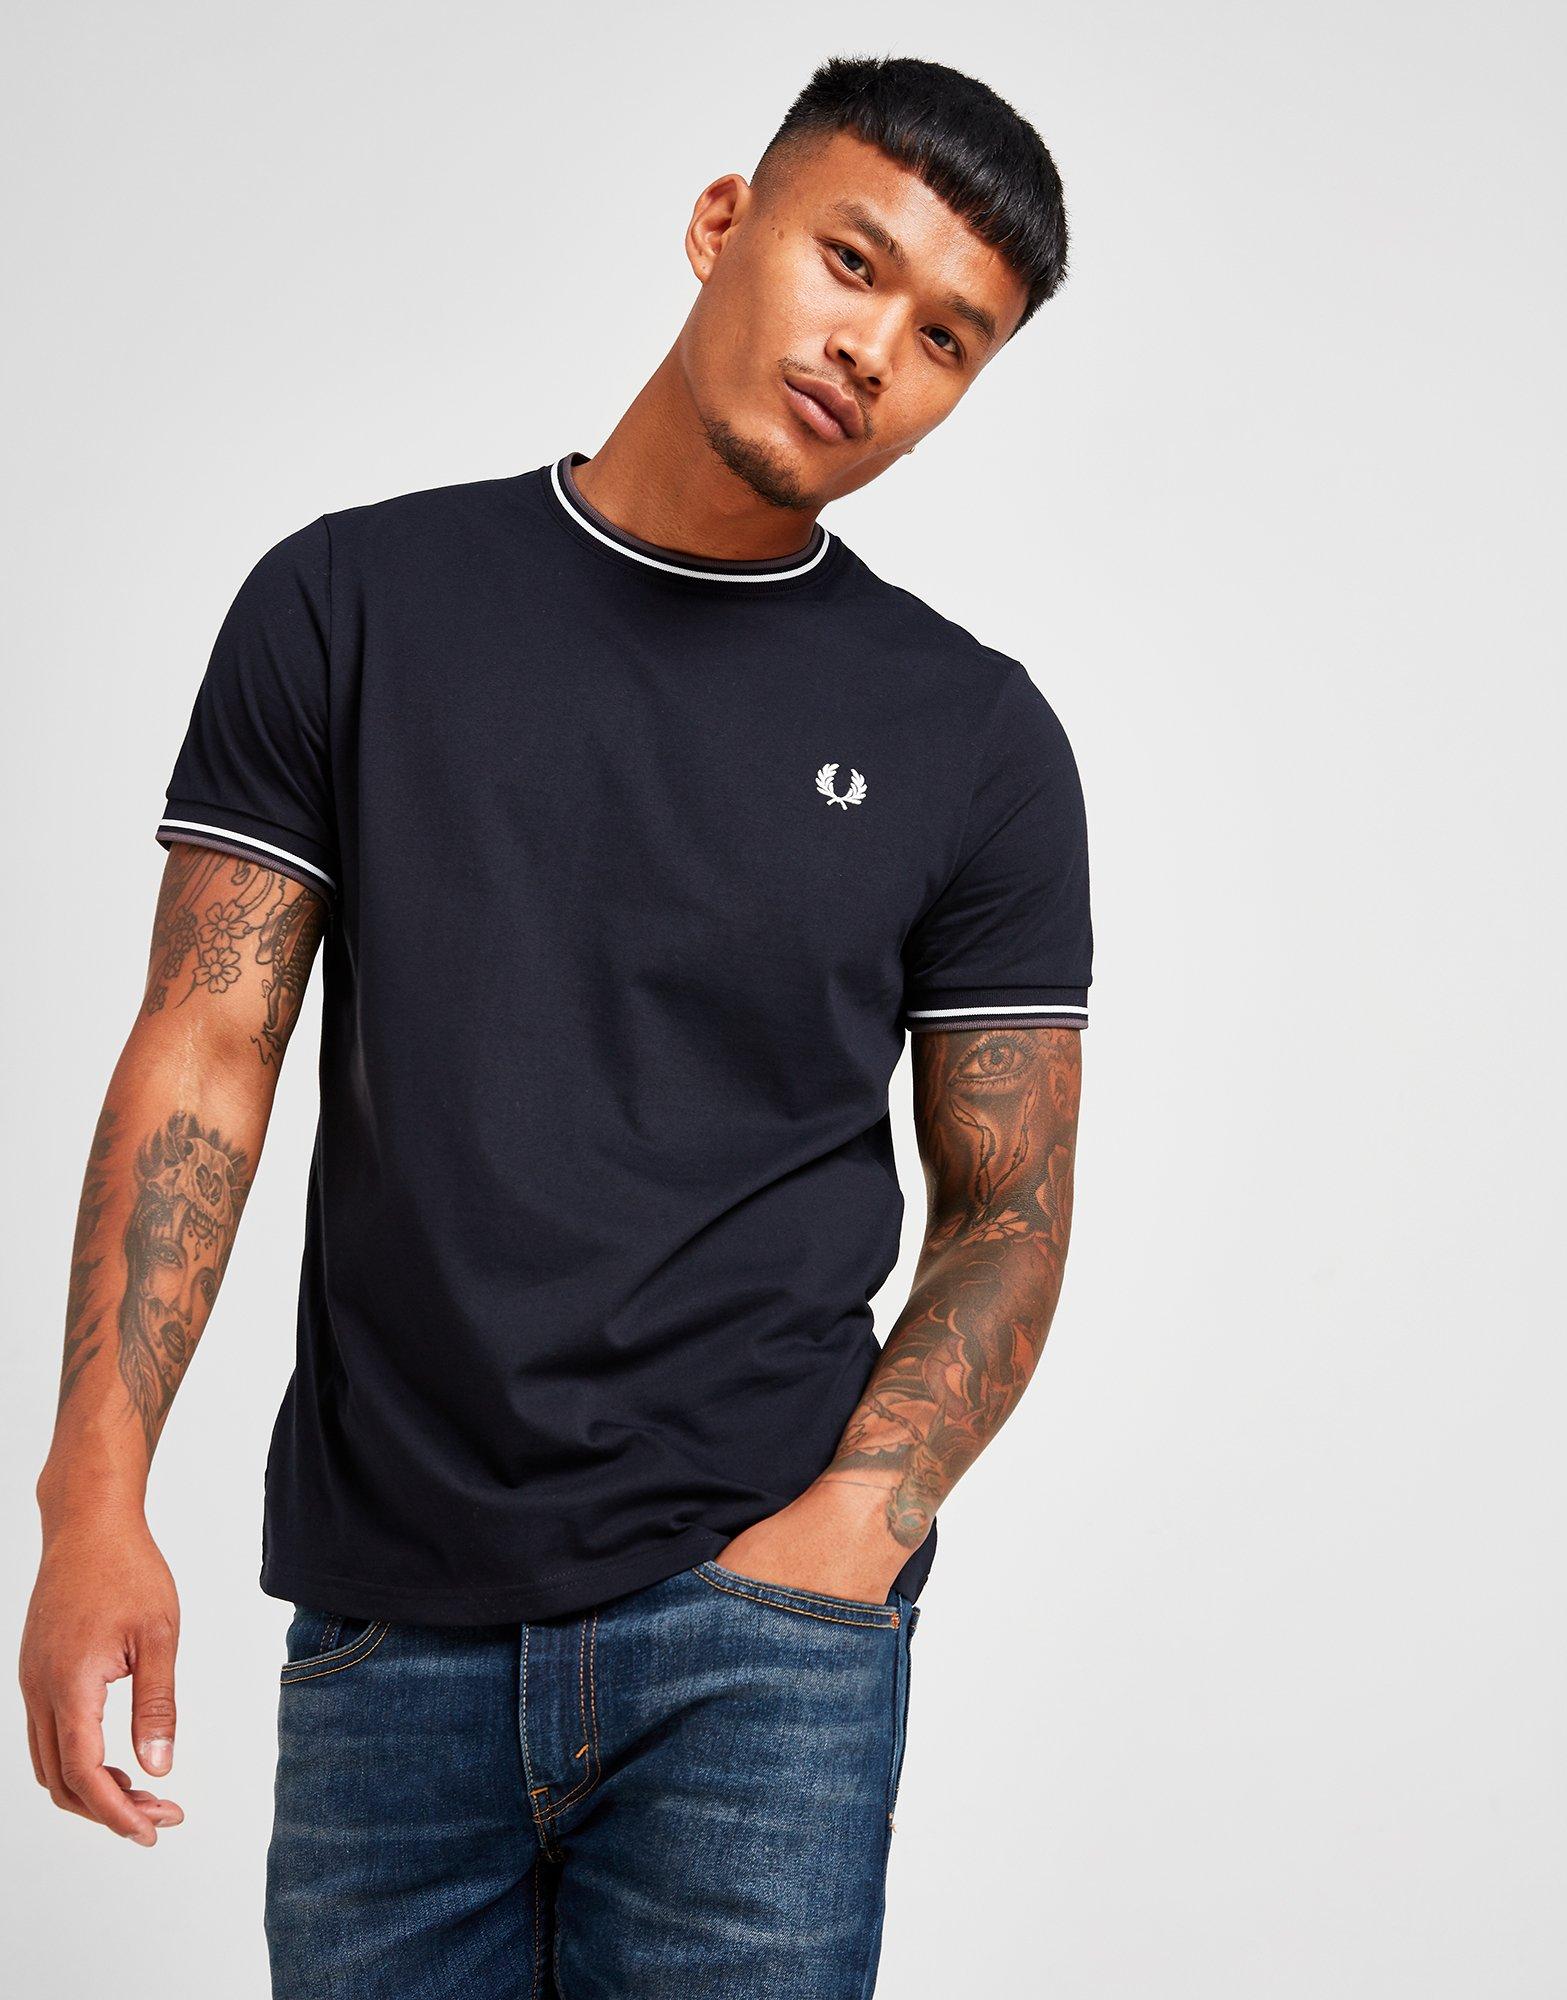 twin tipped t shirt fred perry